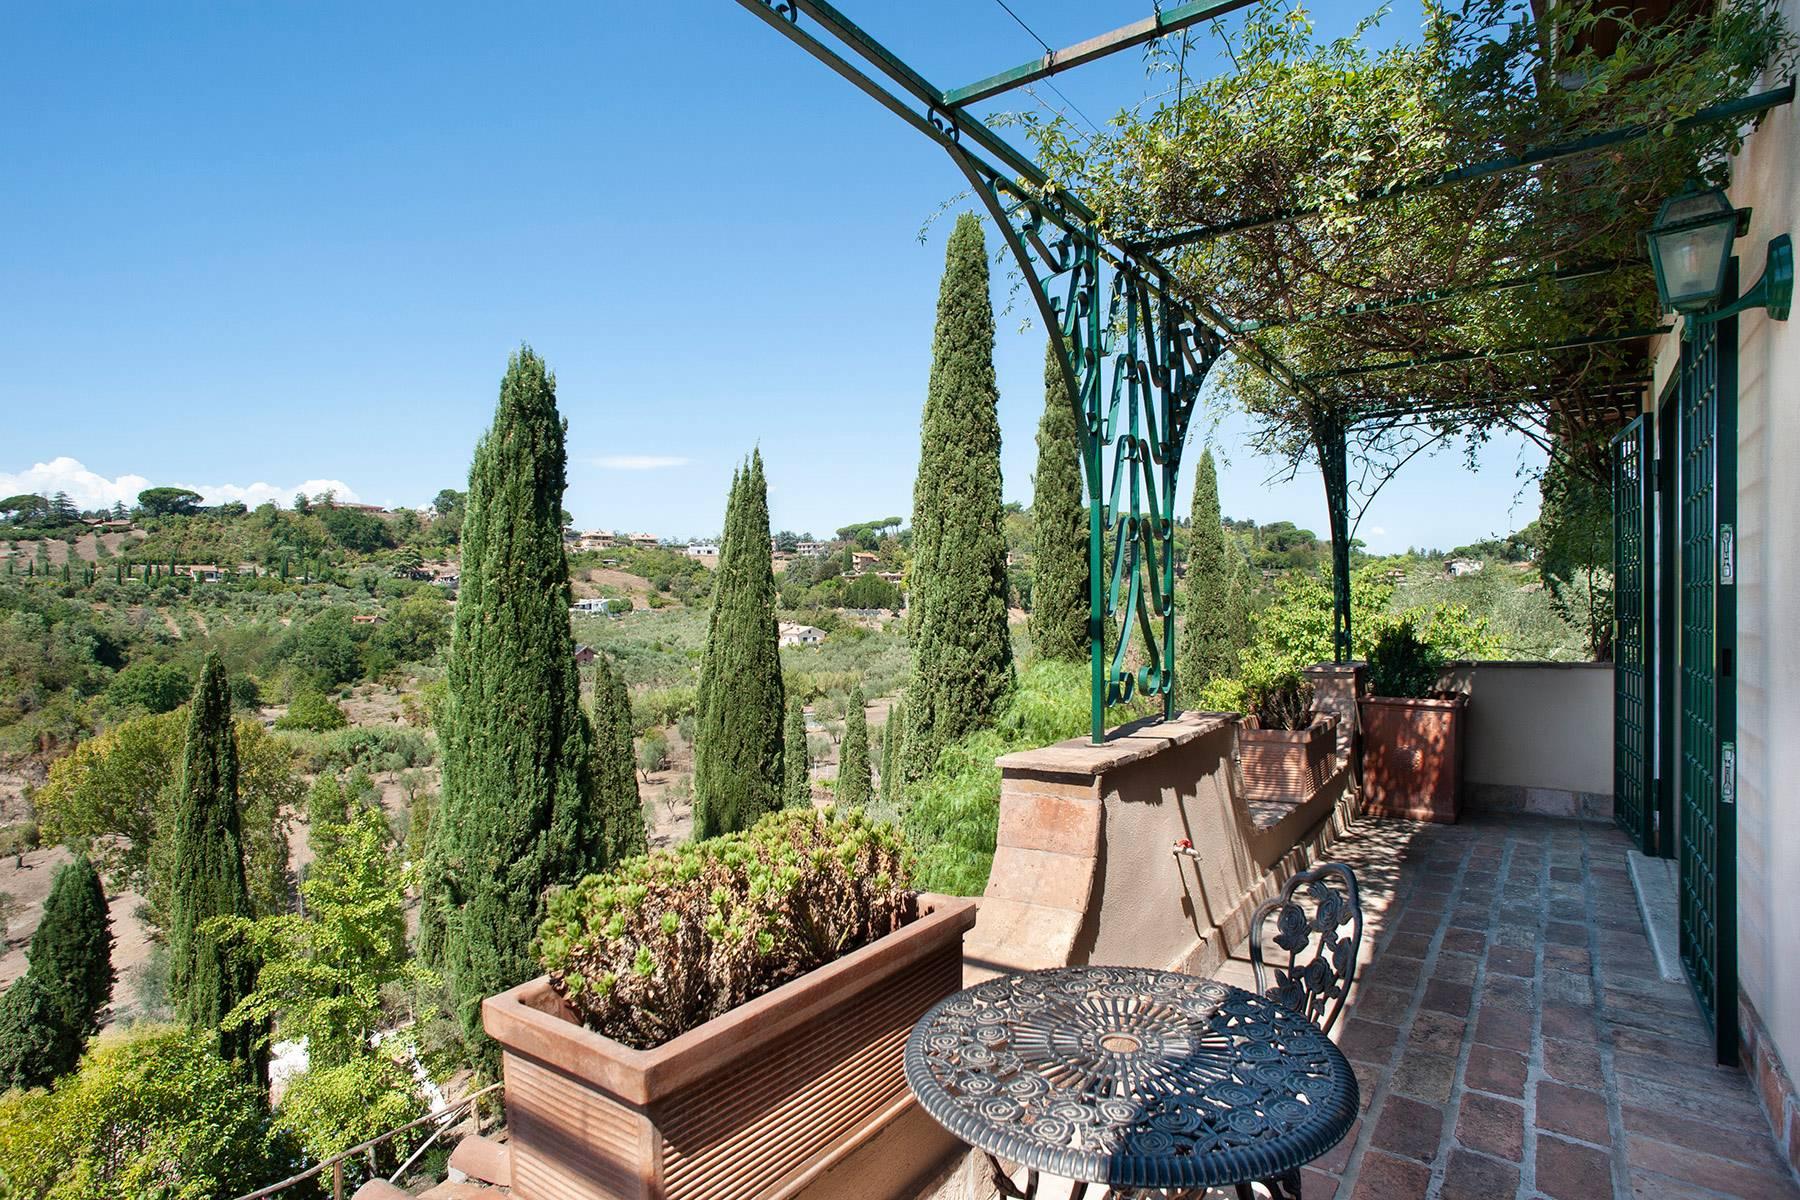 Villa Nayara - Lovely mansion with swimming pool 30 minutes from Rome - 48